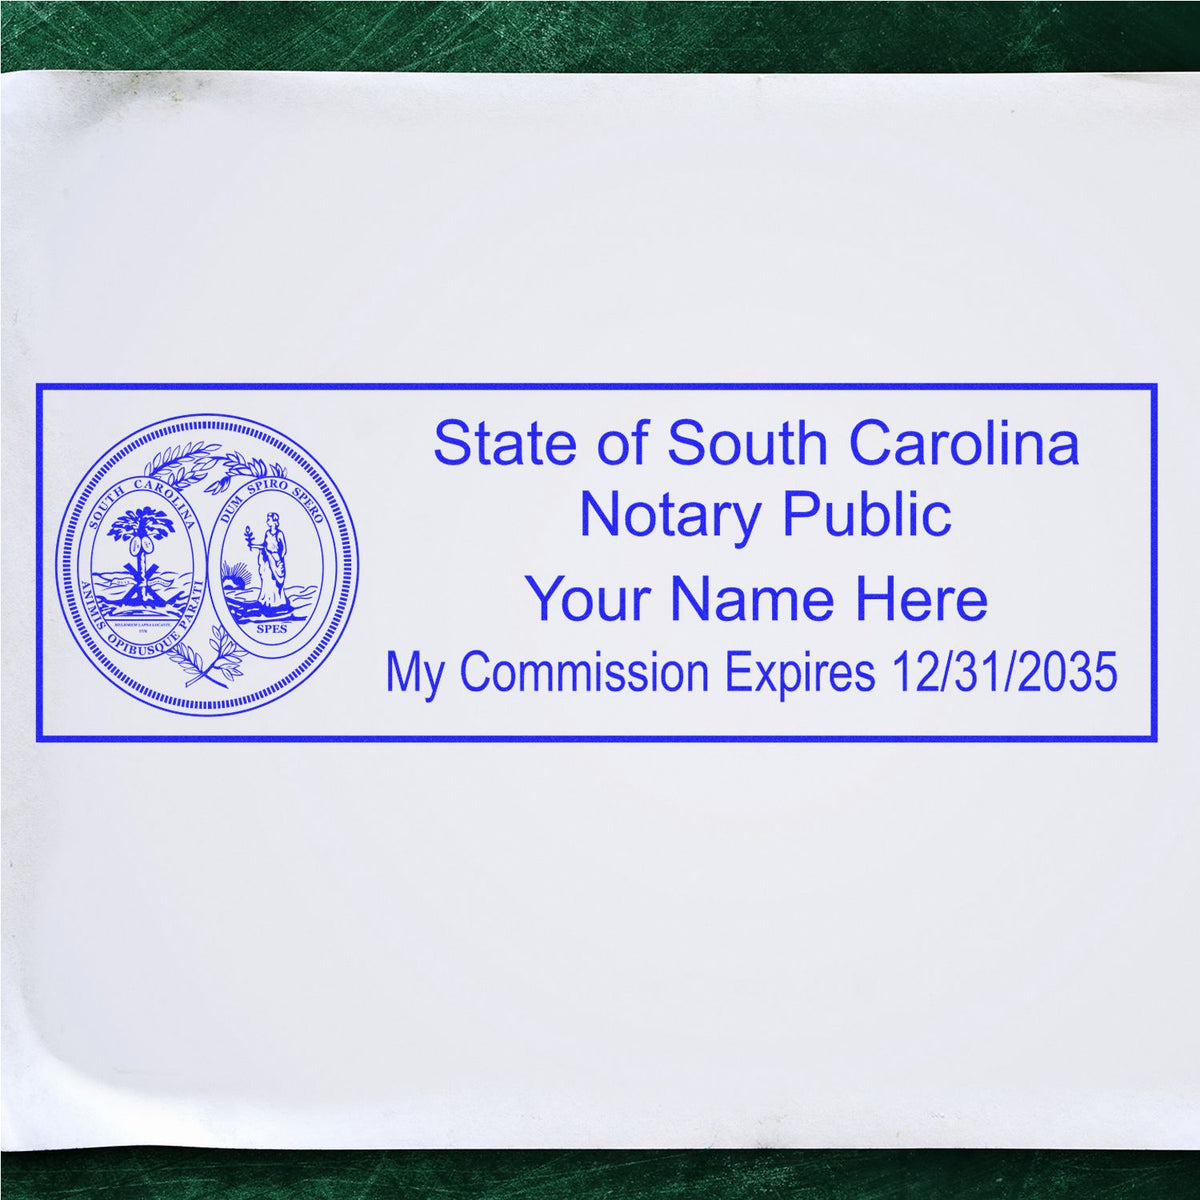 A photograph of the Heavy-Duty South Carolina Rectangular Notary Stamp stamp impression reveals a vivid, professional image of the on paper.